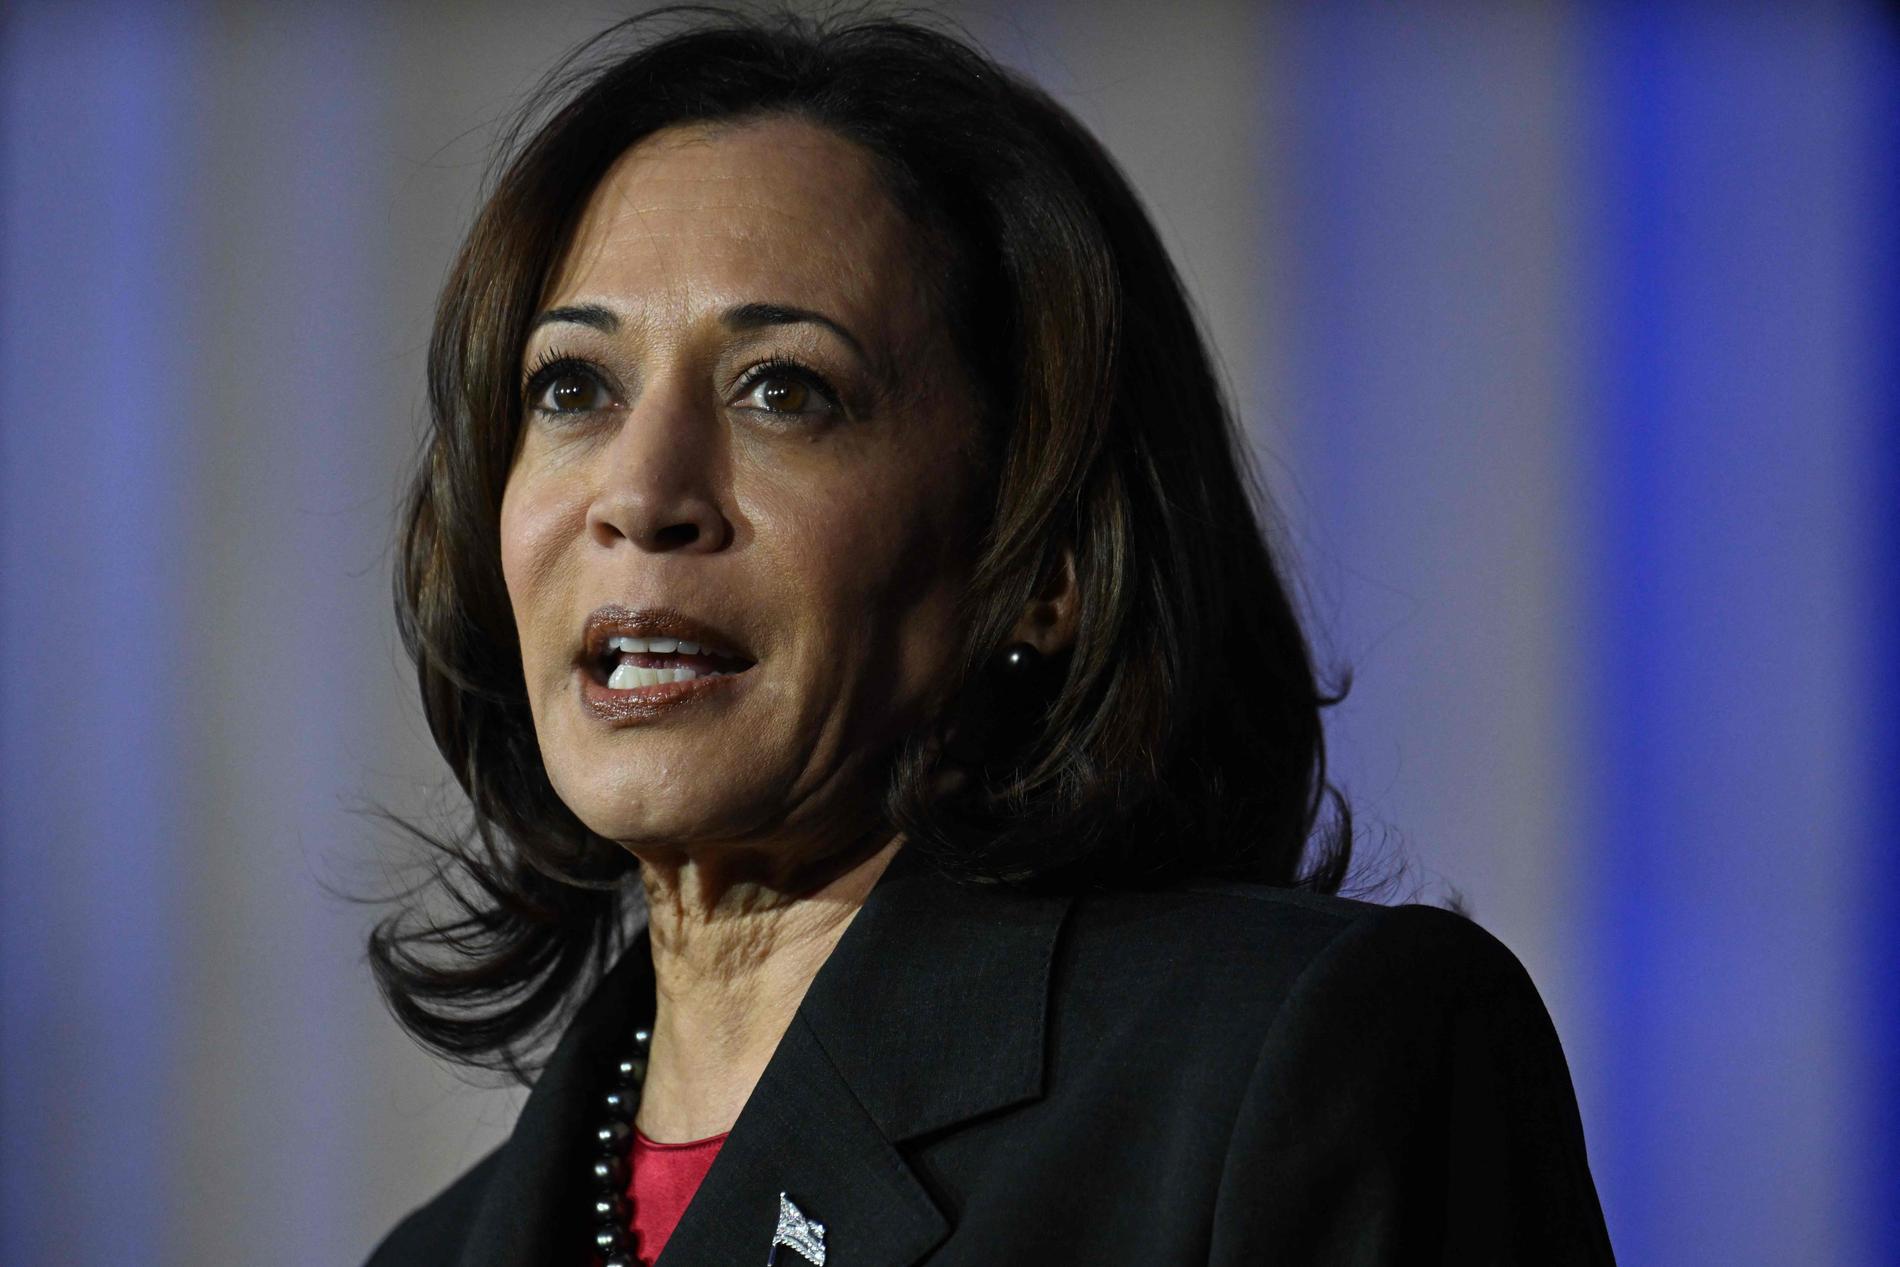 Out of the Shadows: Vice President Kamala Harris has been given an important task in mobilizing women and young voters.